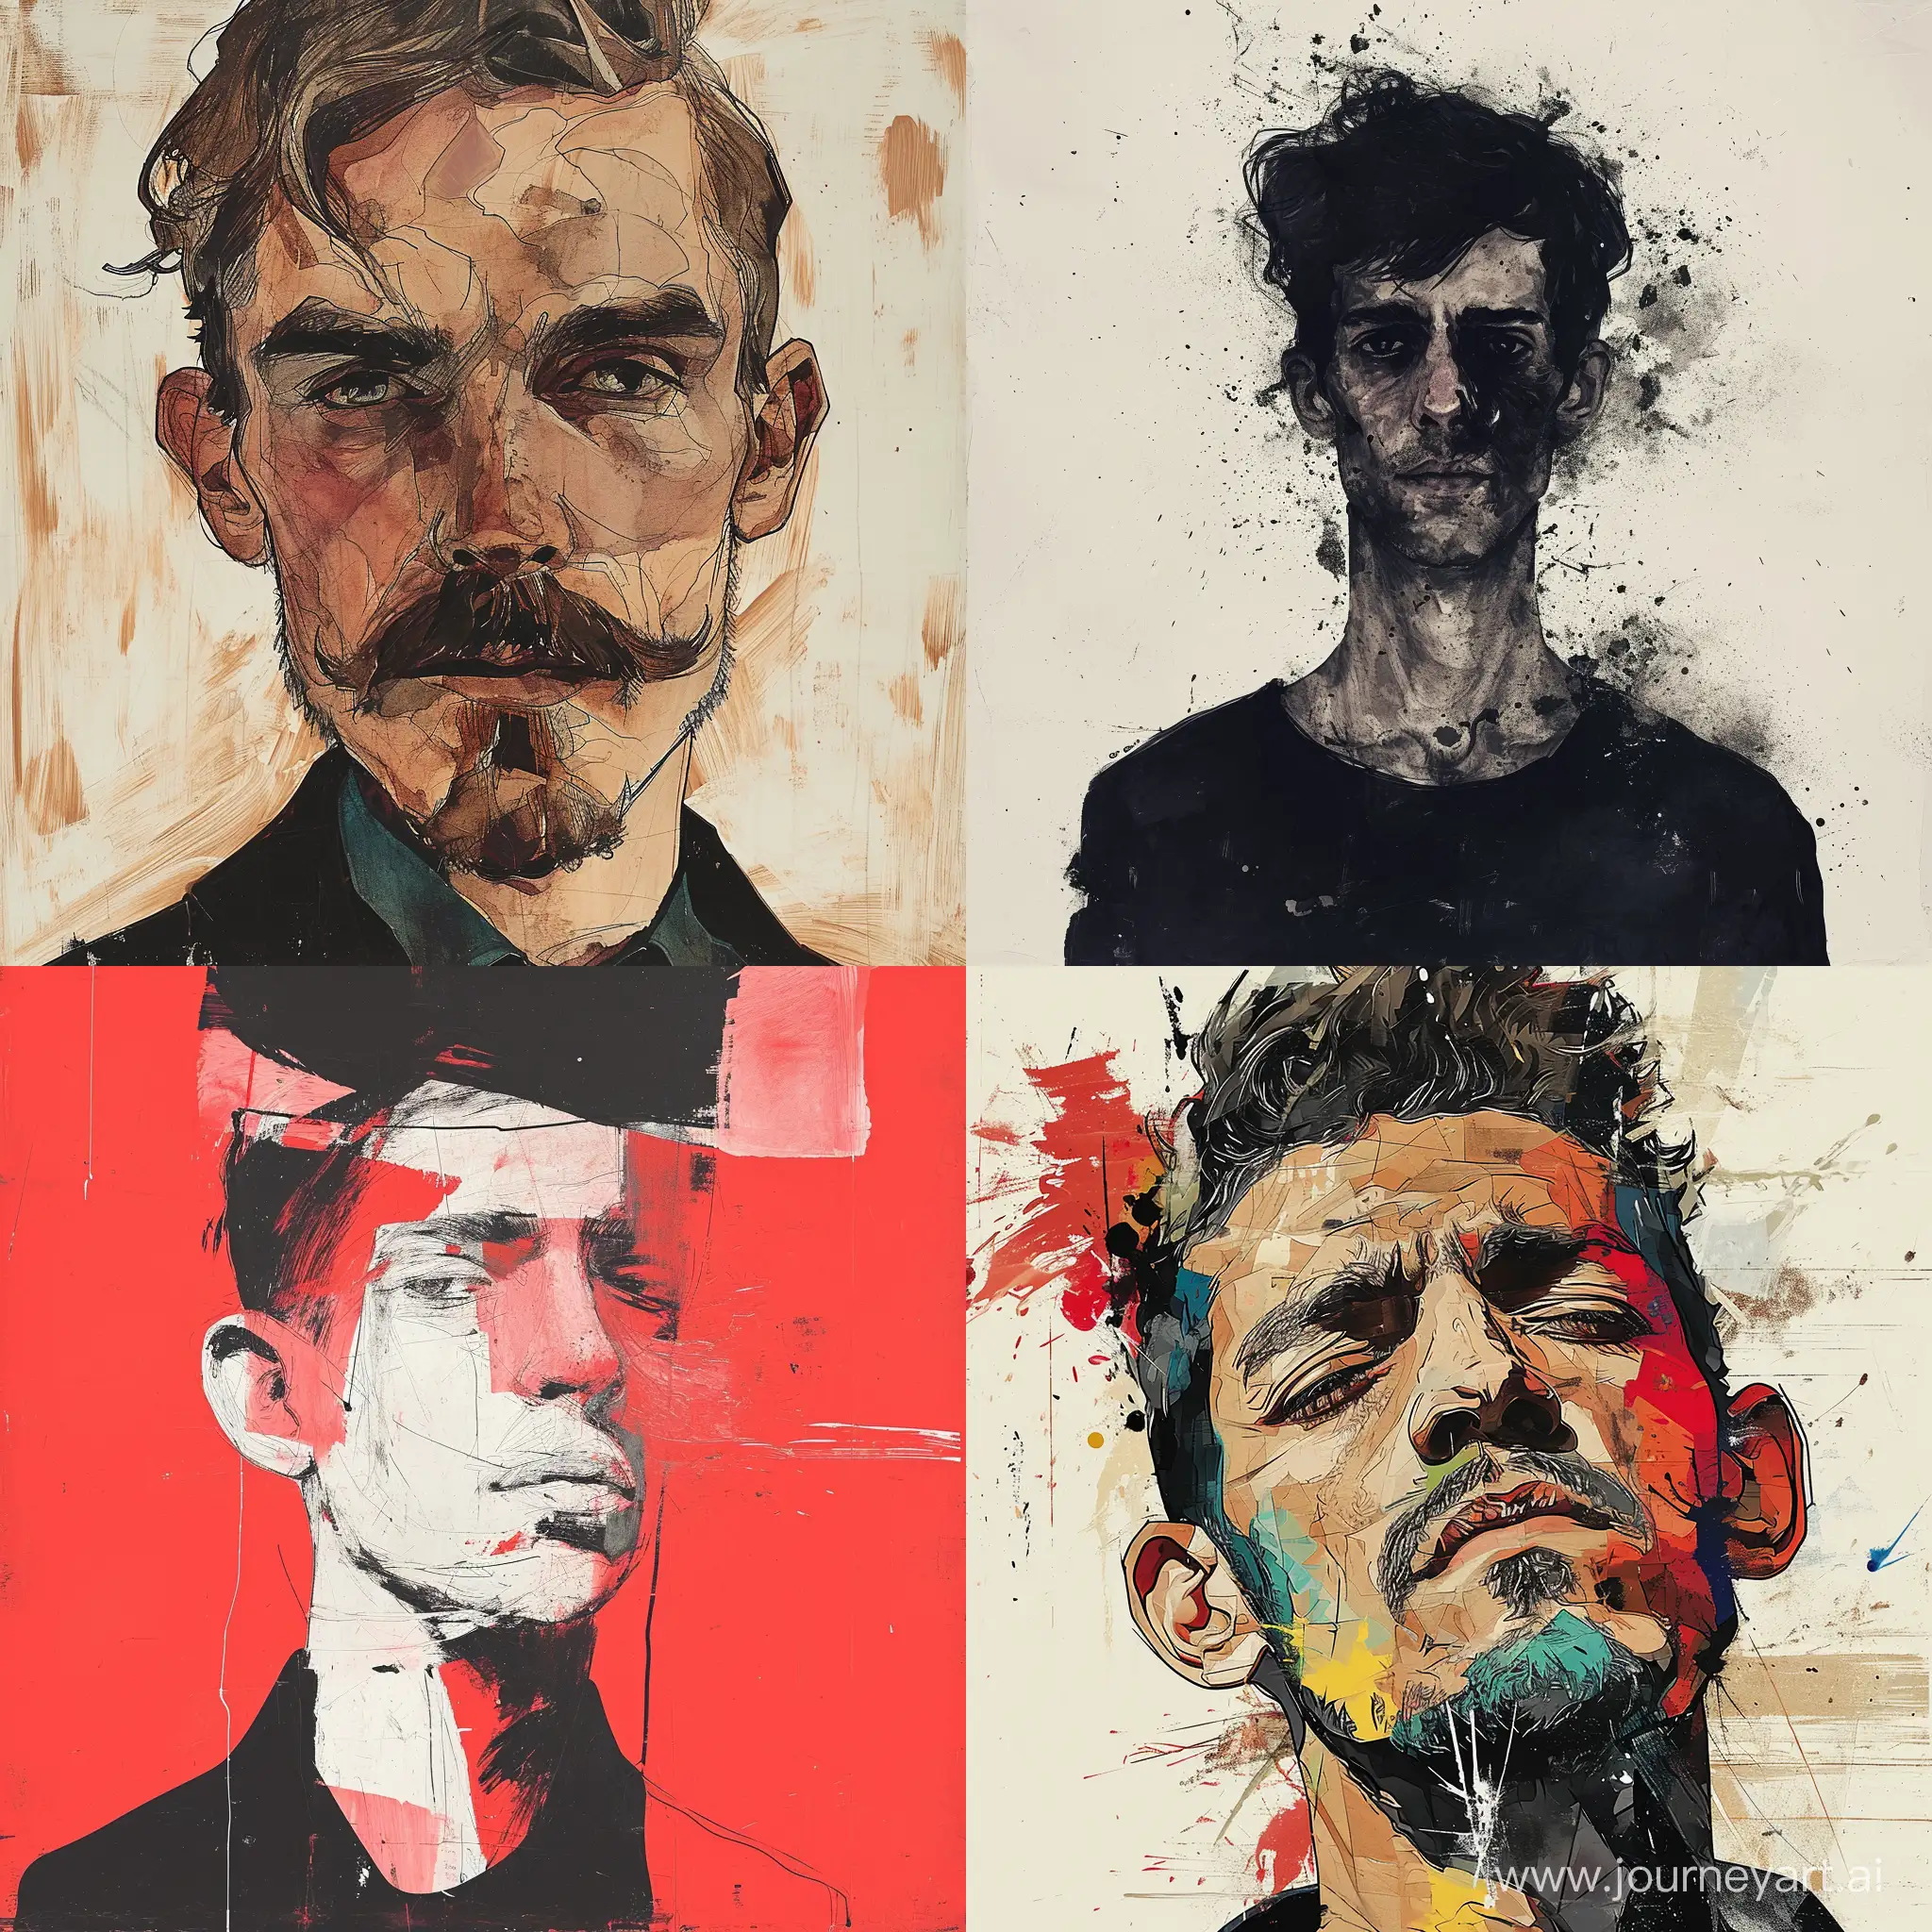 Expressive-Man-Portrait-Illustration-Poster-by-Januz-Miralles-and-Billy-Childish